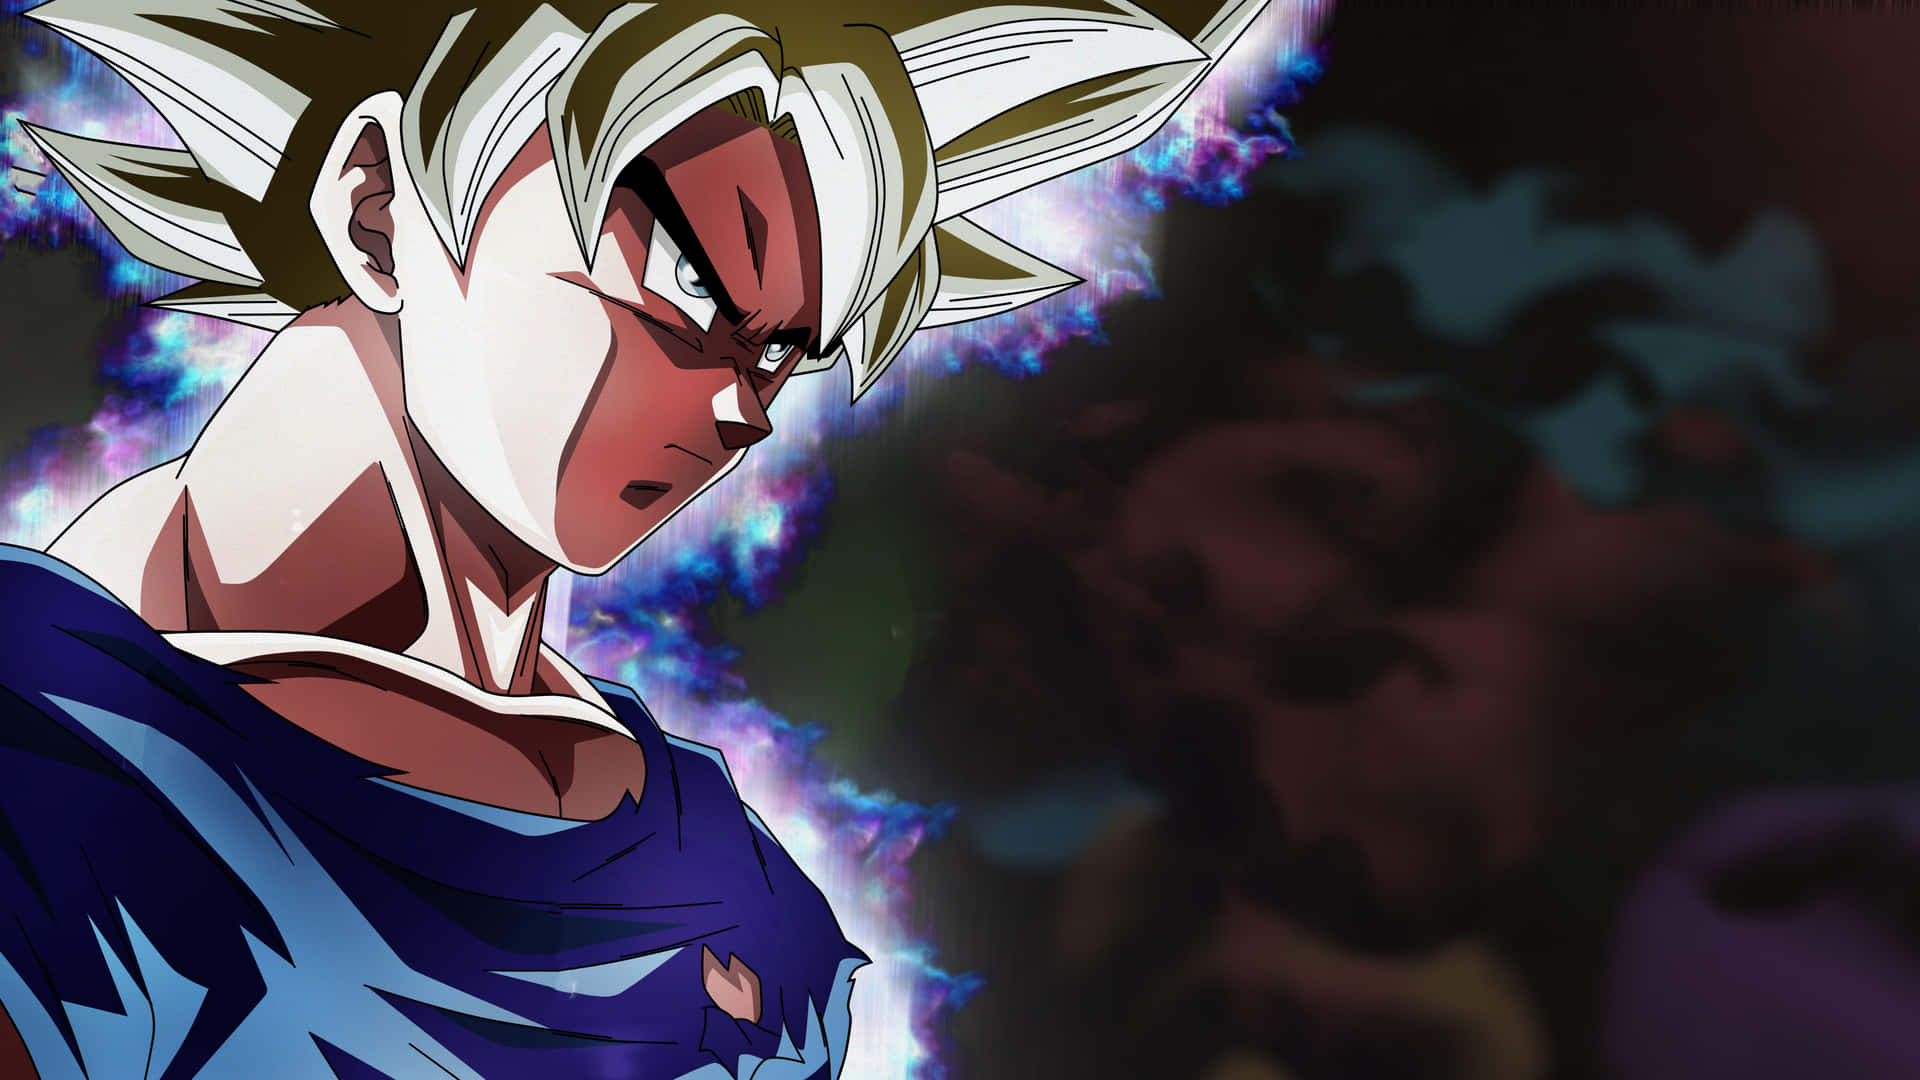 Goku and Vegeta face off in an epic battle for the fate of all universes in Dragon Ball Super